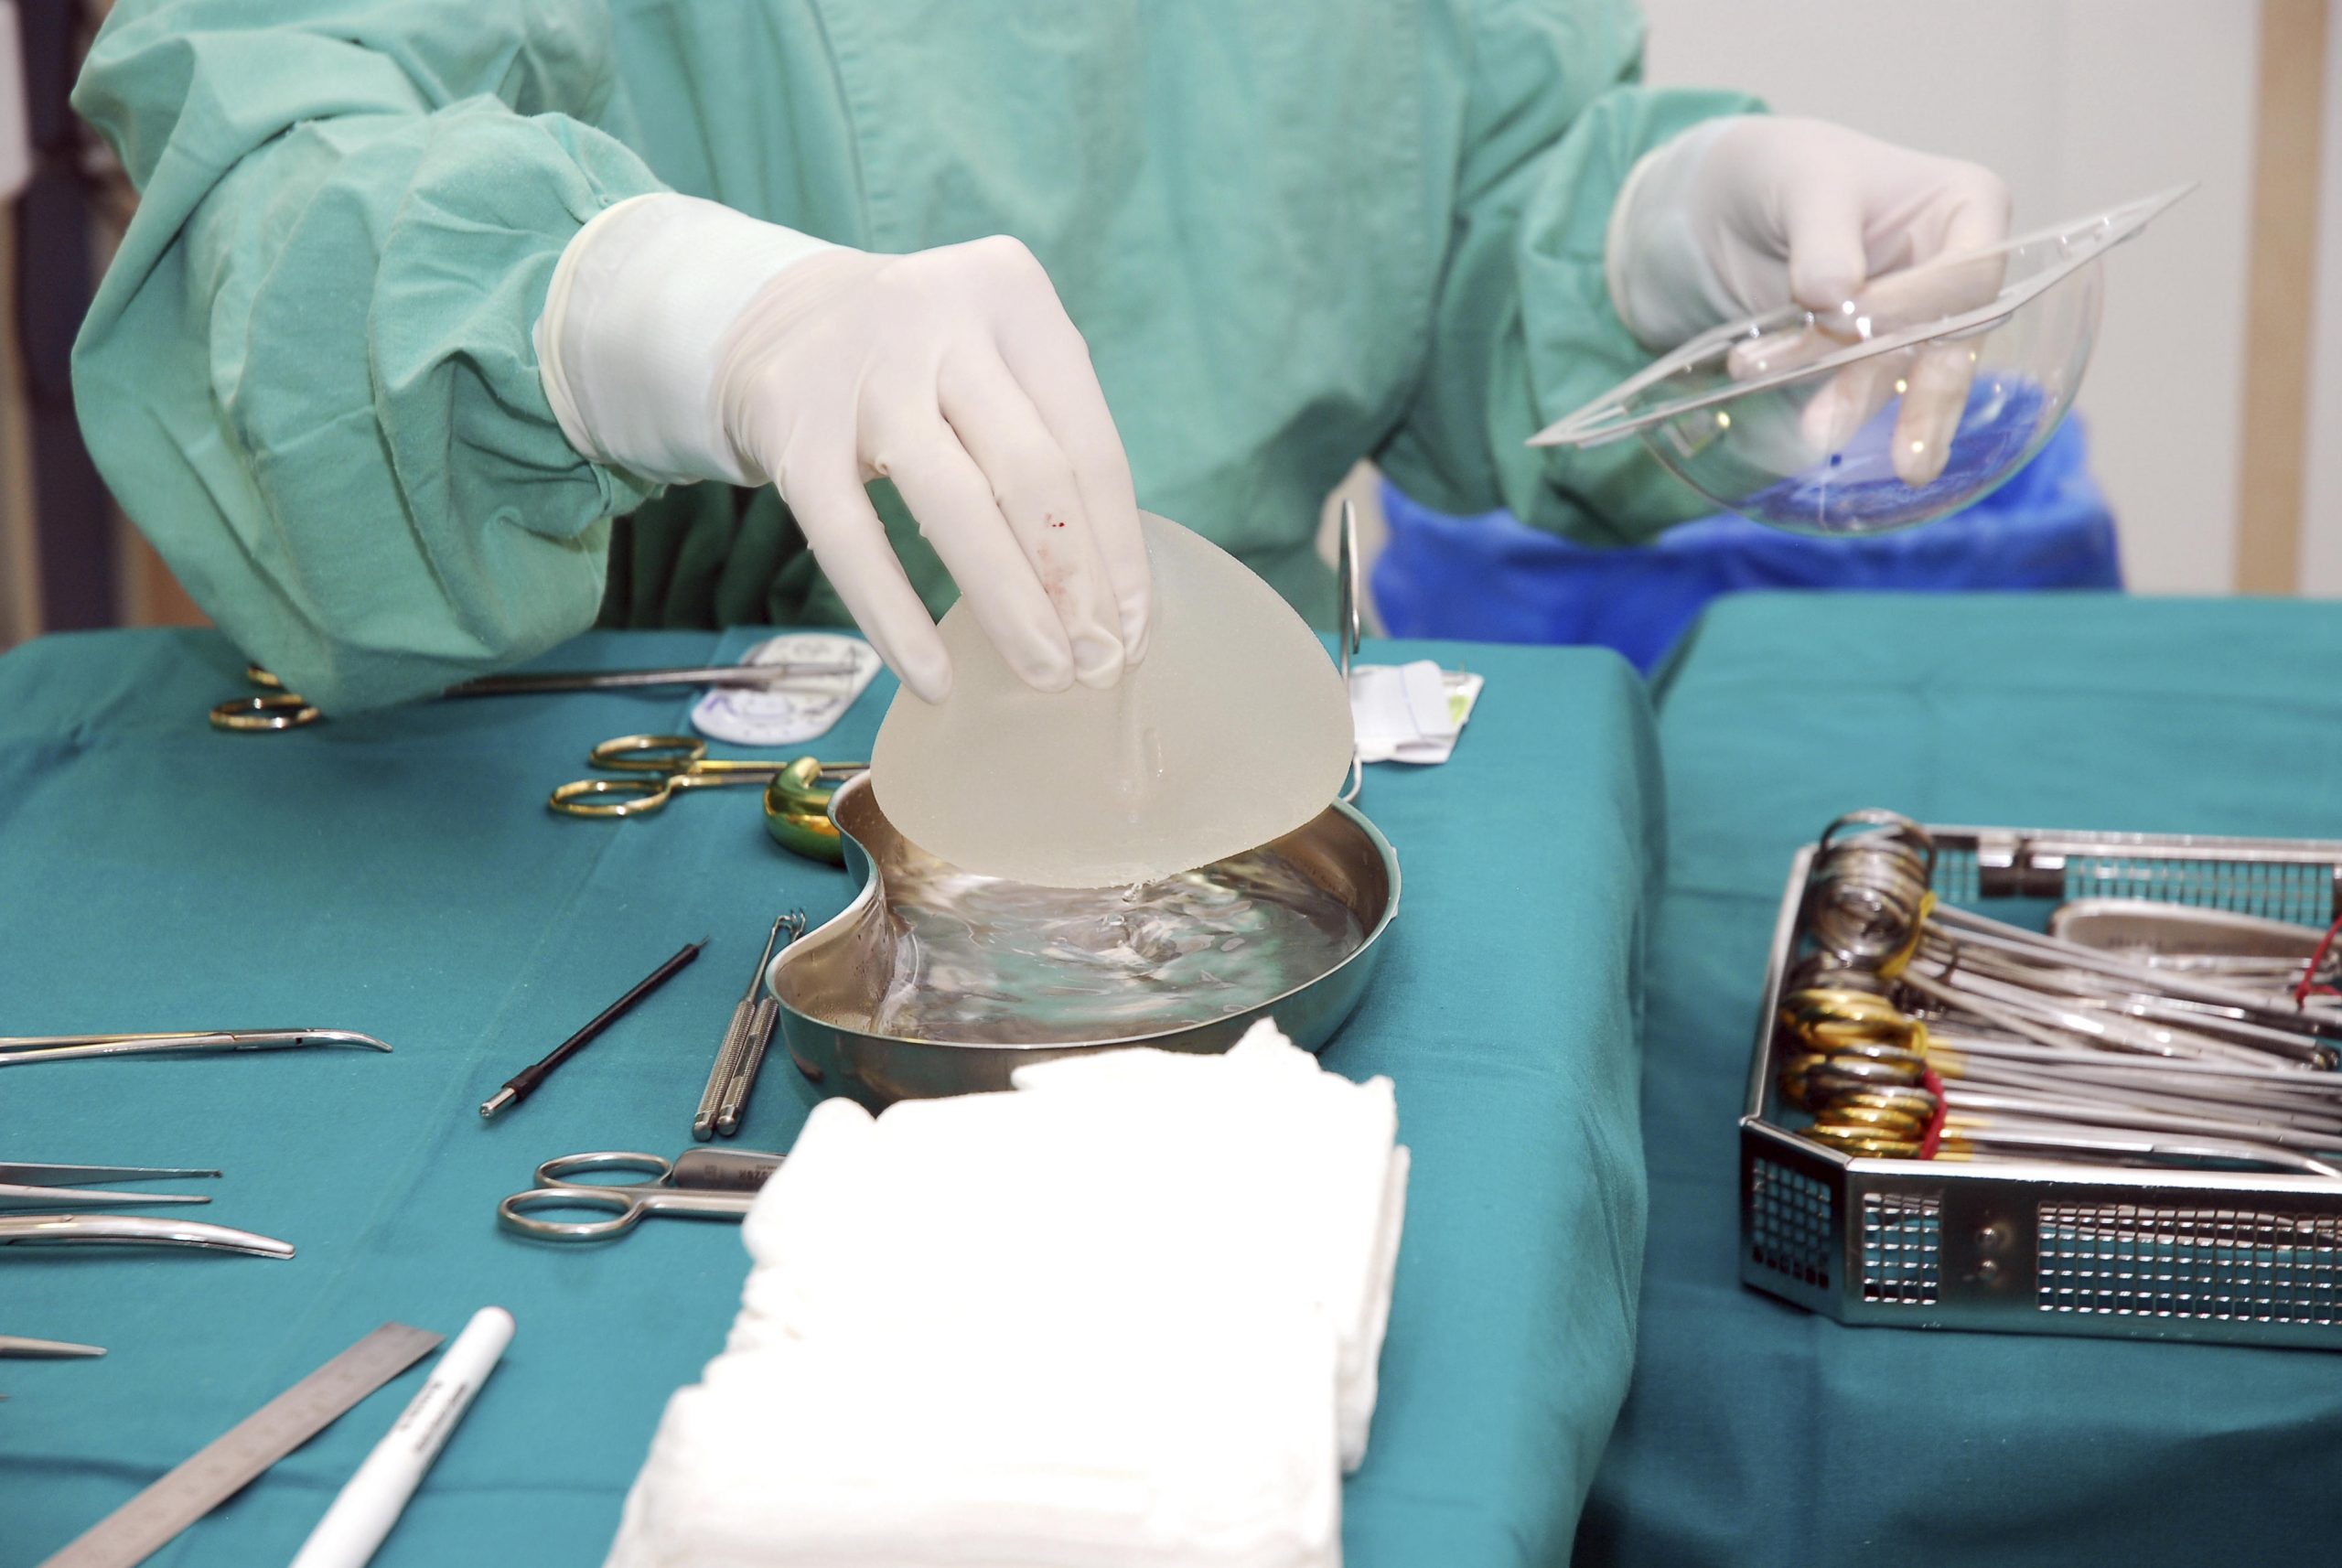 FDA: Breast implants linked to 9 deaths from rare cancer ...